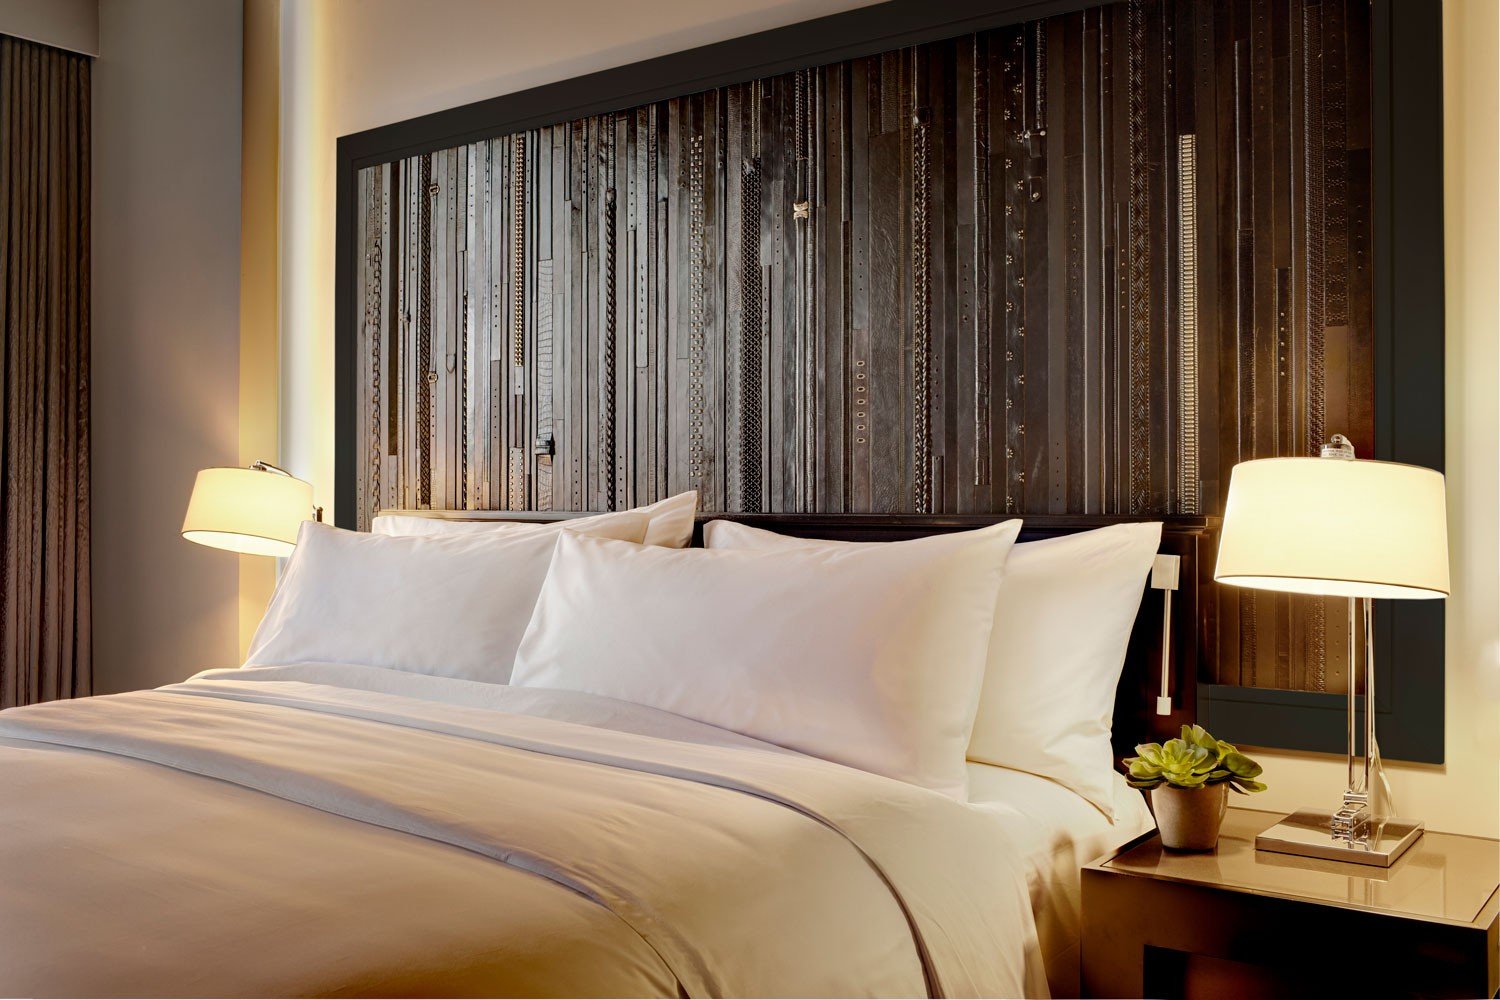 Archer Hotel Austin - King Bed with leather belt wall art